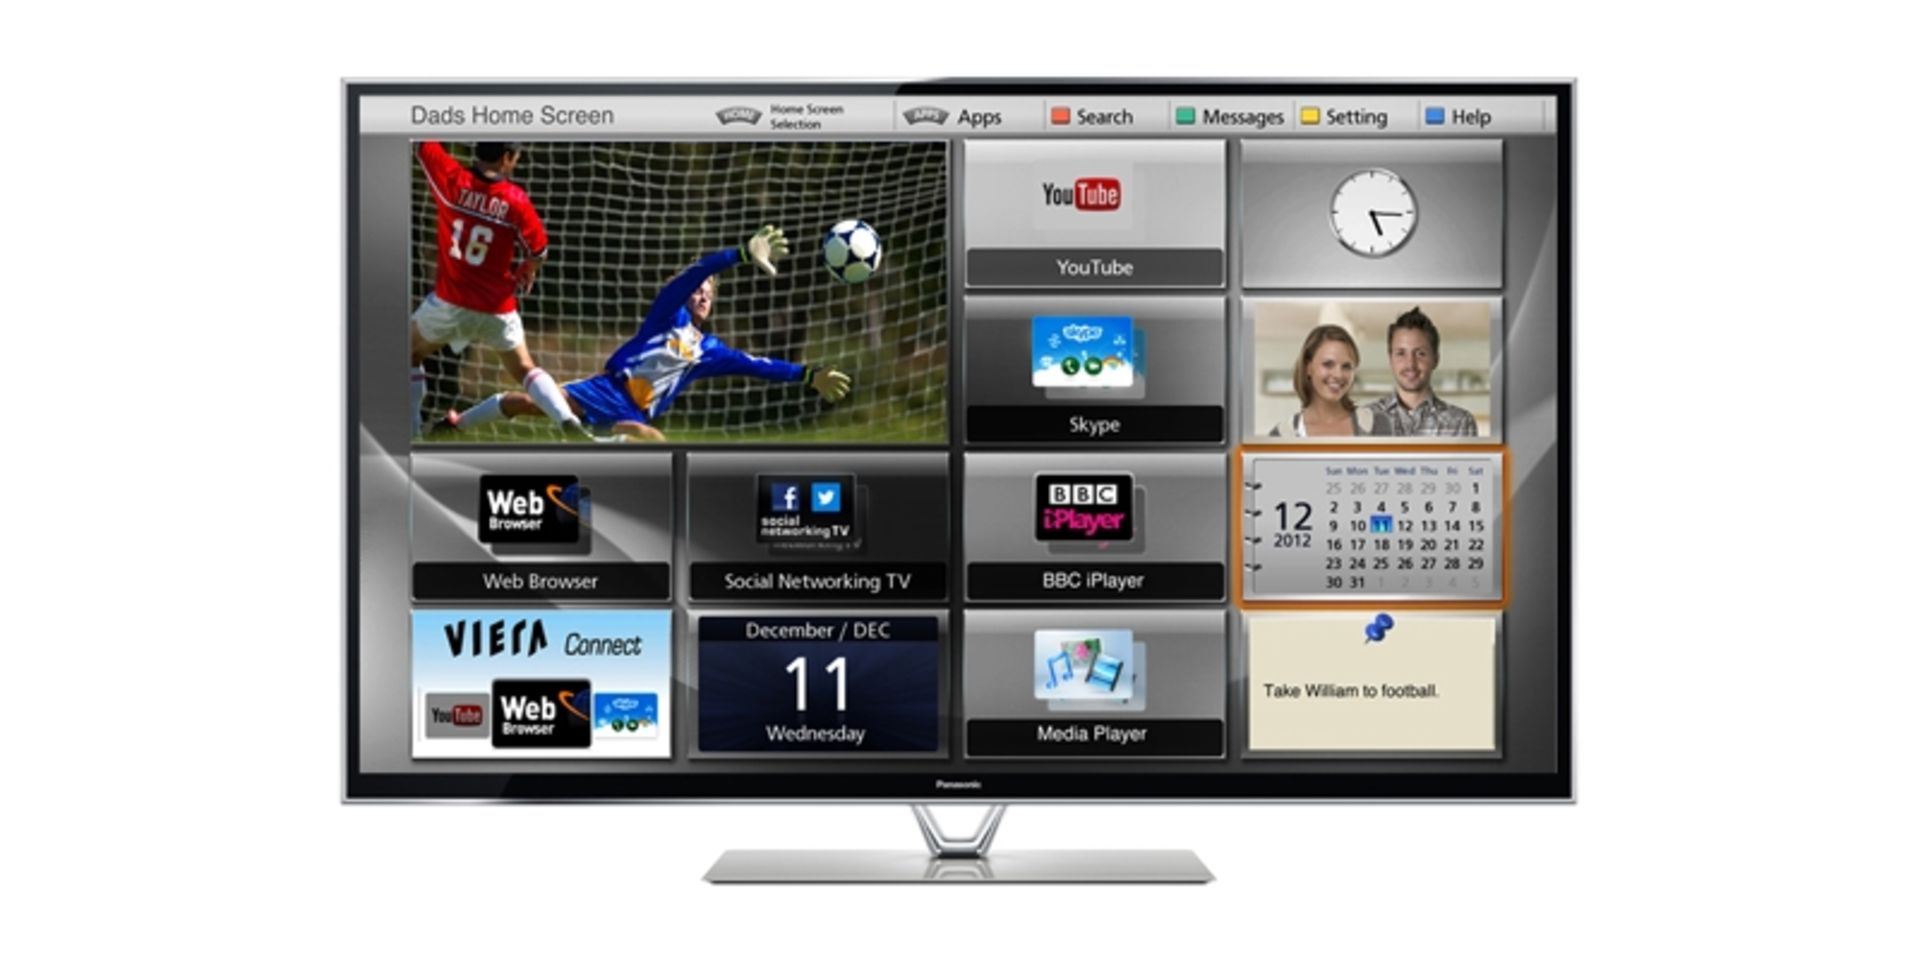 PANASONIC VIERA TX-L55DT65B 55" SMART 3D HD LED TV. RRP £1,499 - WITH REMOTE, STAND & MAINS LEAD /